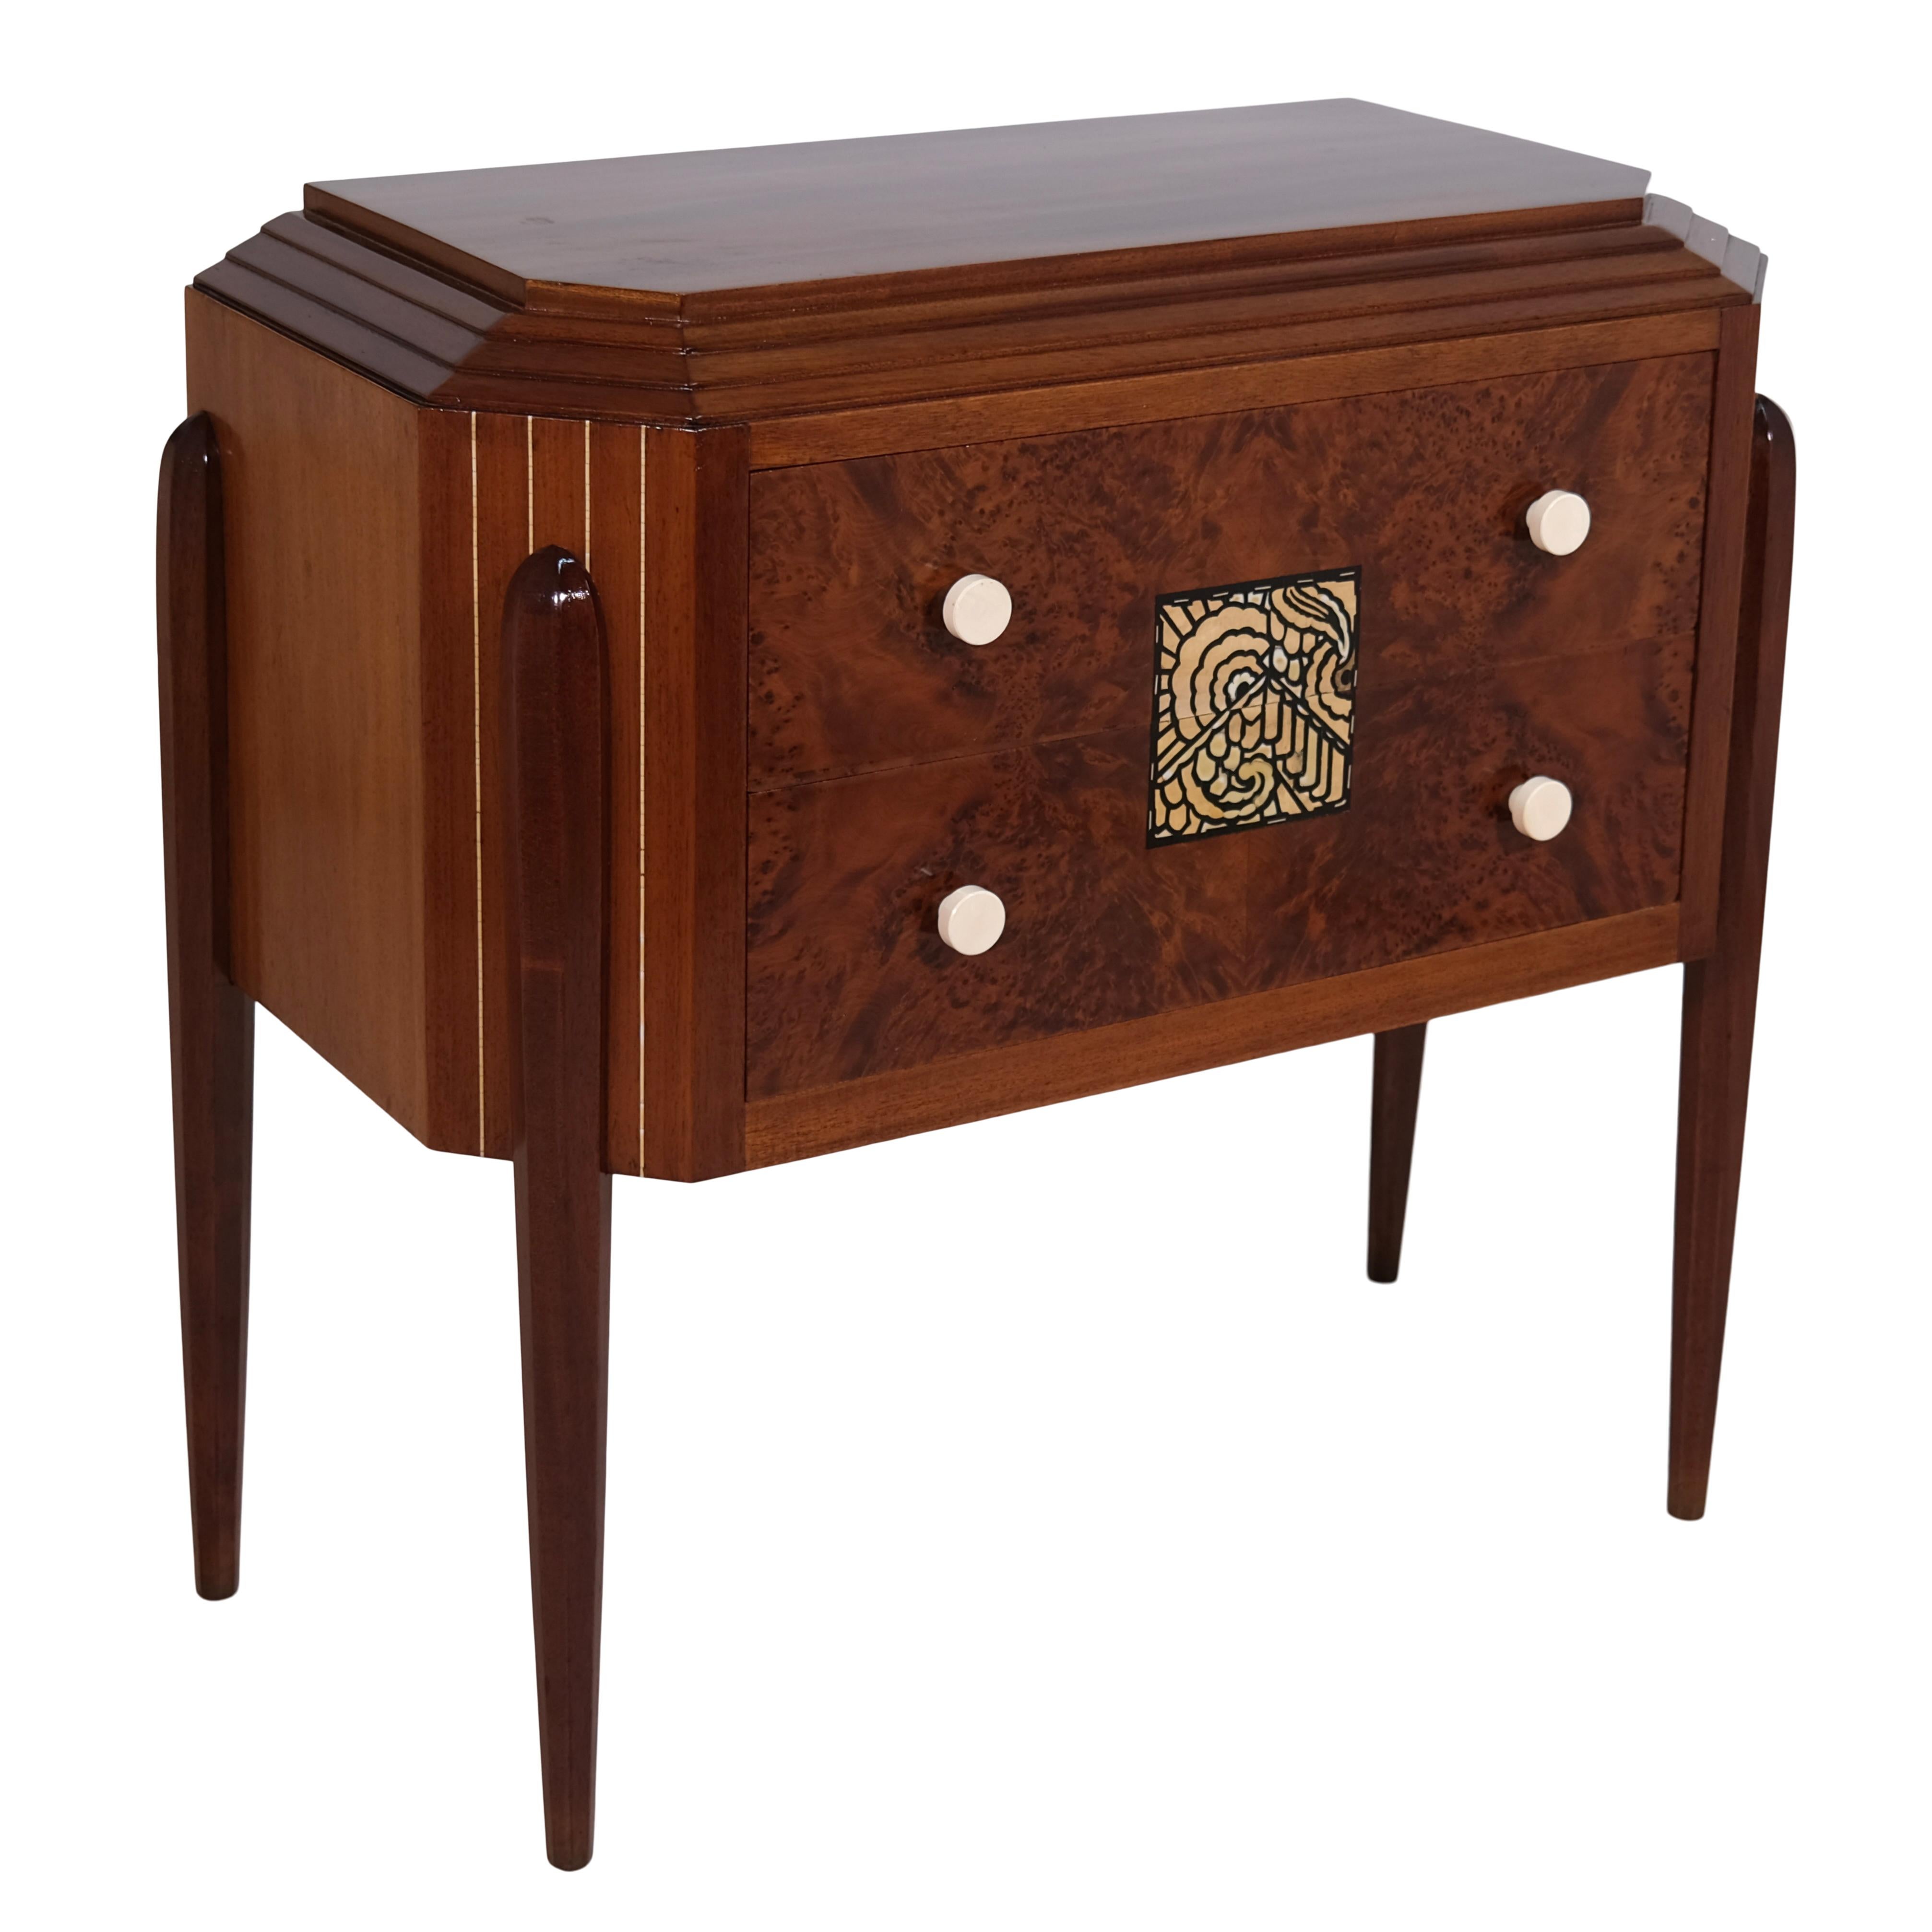 Polished French Art Deco Chest Of Drawers in Mahogany and Thuja with Floral Inlays For Sale